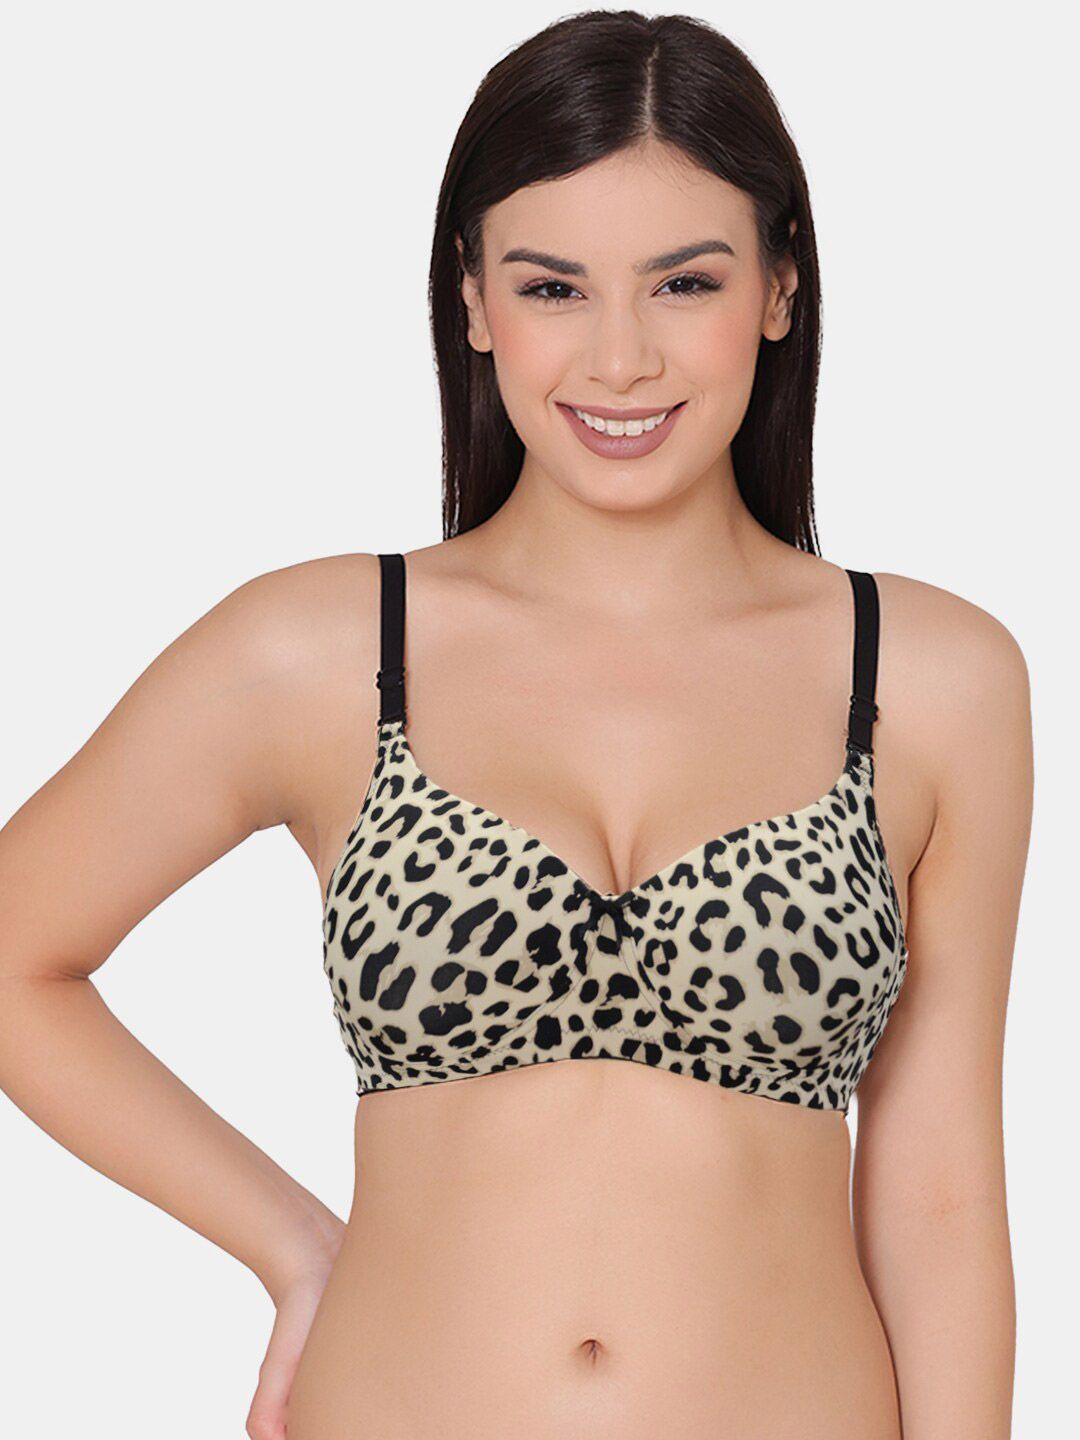 groversons paris beauty animal printed full coverage lightly padded bra